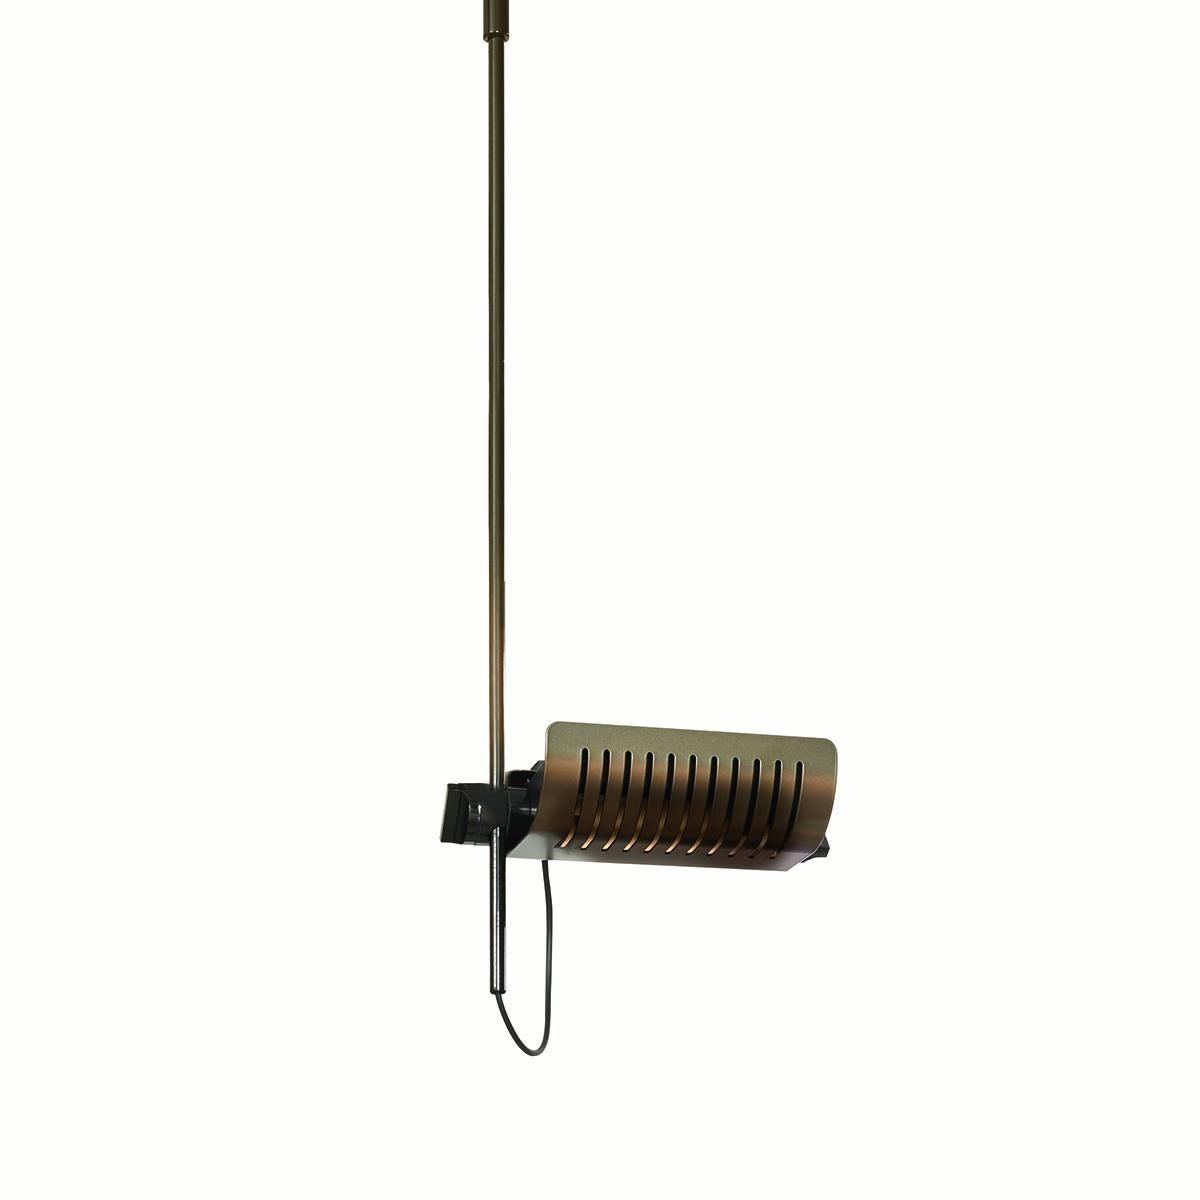 Suspension lamp 'Colombo' designed by Joe Colombo in 1970.
Ceiling lamp giving direct and indirect light, chromium-plated stem, lacquered ceiling fixing. Adjustable reflector in lacquered aluminium. Manufactured by Oluce, Italy.

The visionary